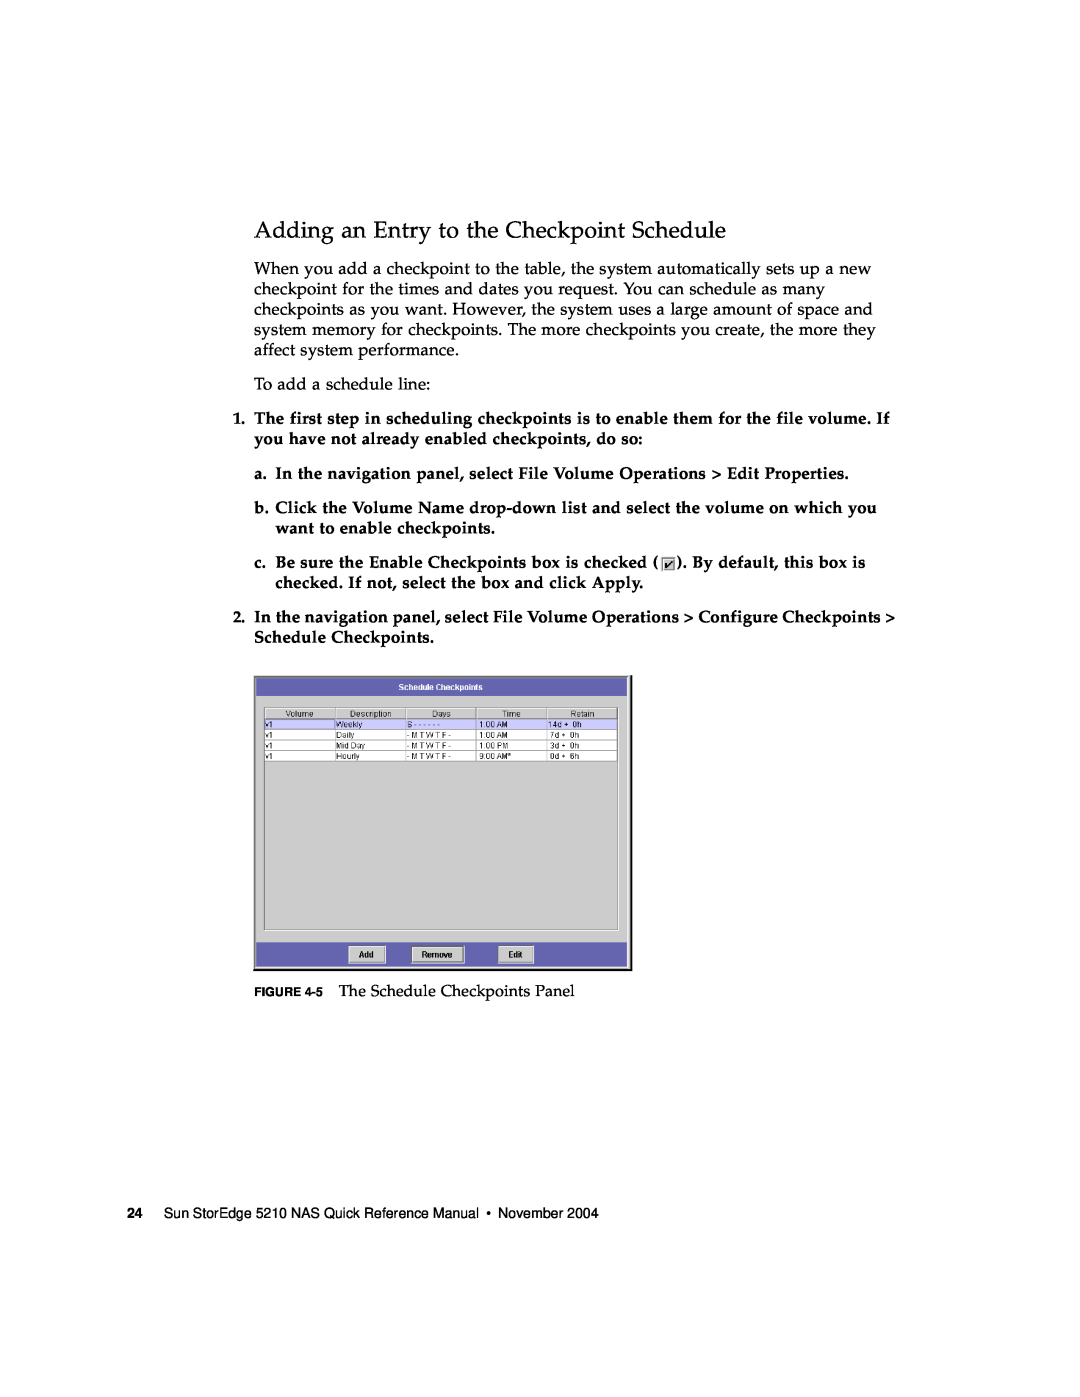 Sun Microsystems 5210 NAS manual Adding an Entry to the Checkpoint Schedule 